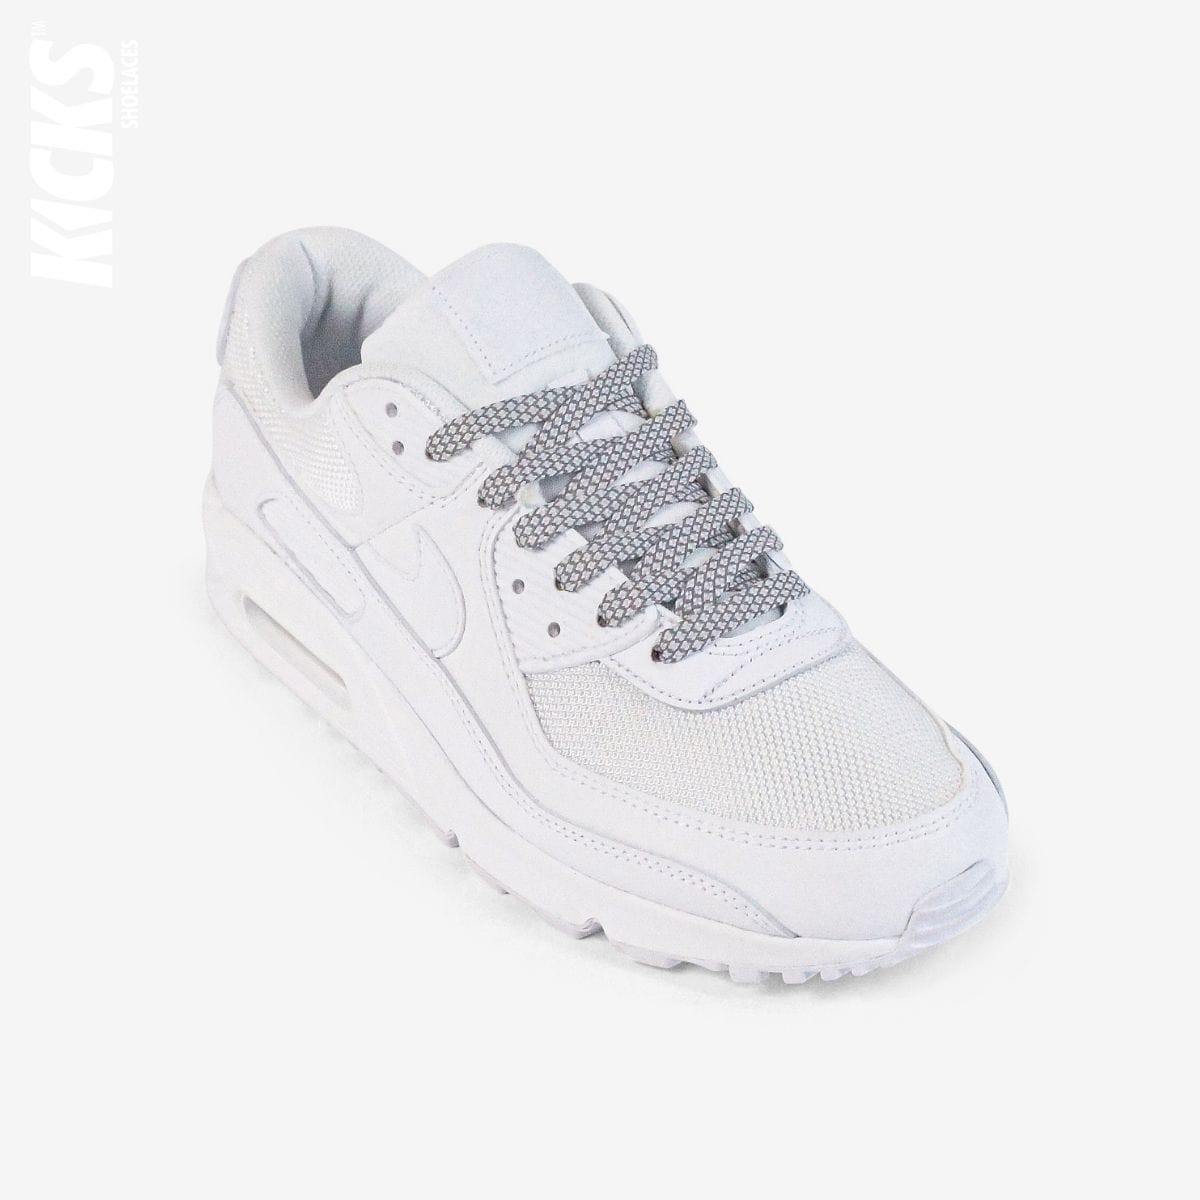 grey-reflective-colored-shoelaces-on-white-sneakers